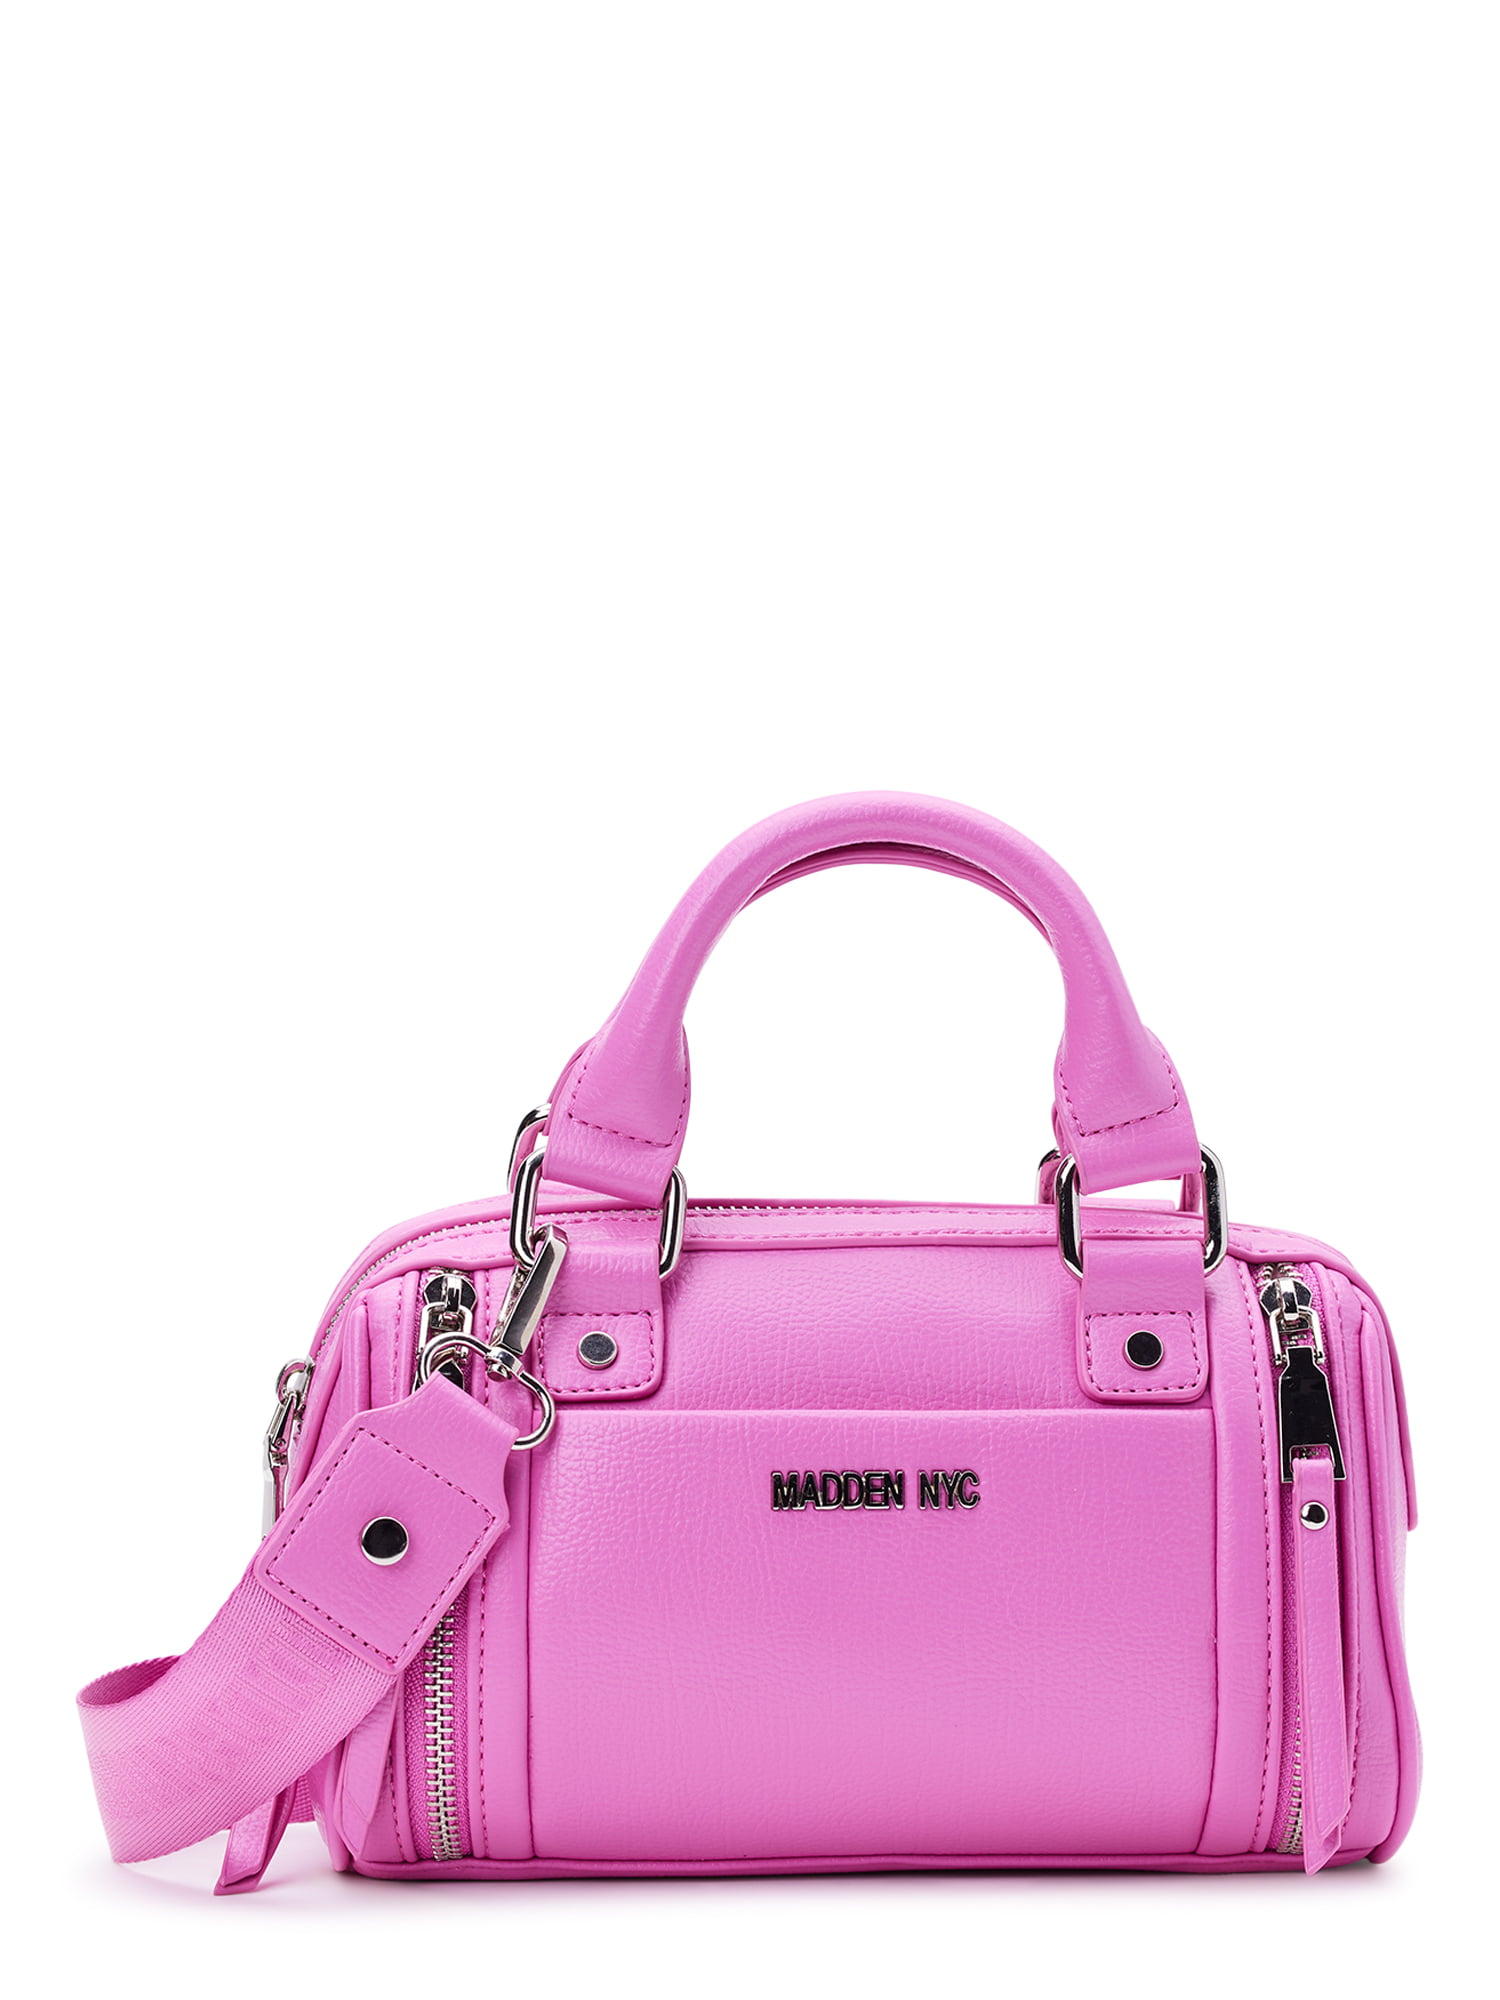 Can you wear a pink bag with anything? - Quora